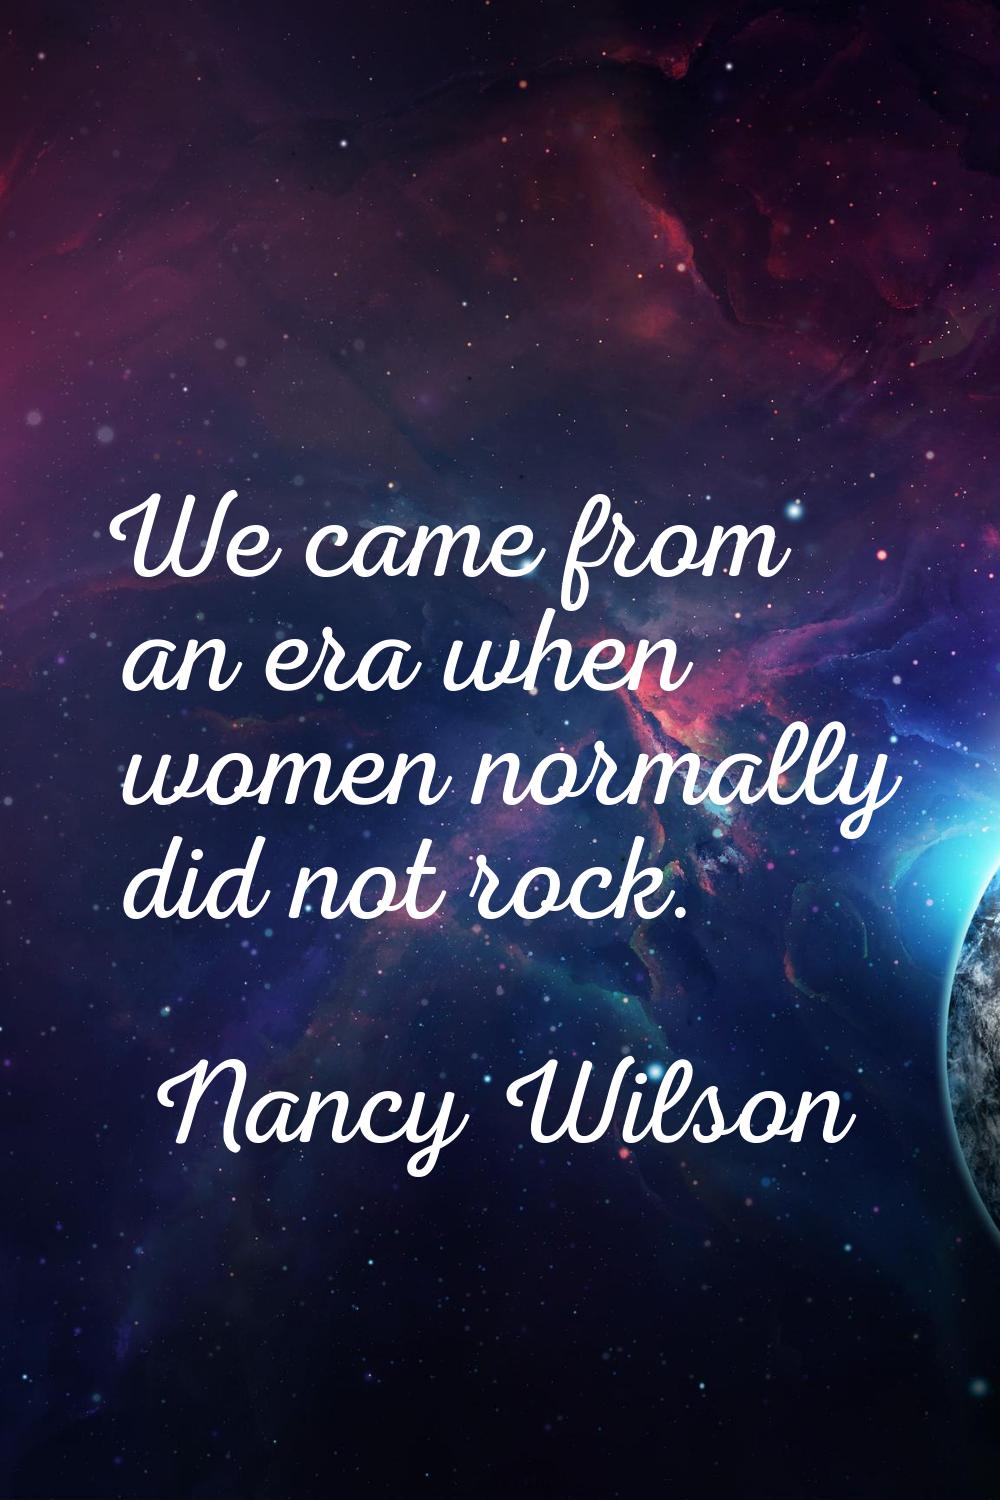 We came from an era when women normally did not rock.